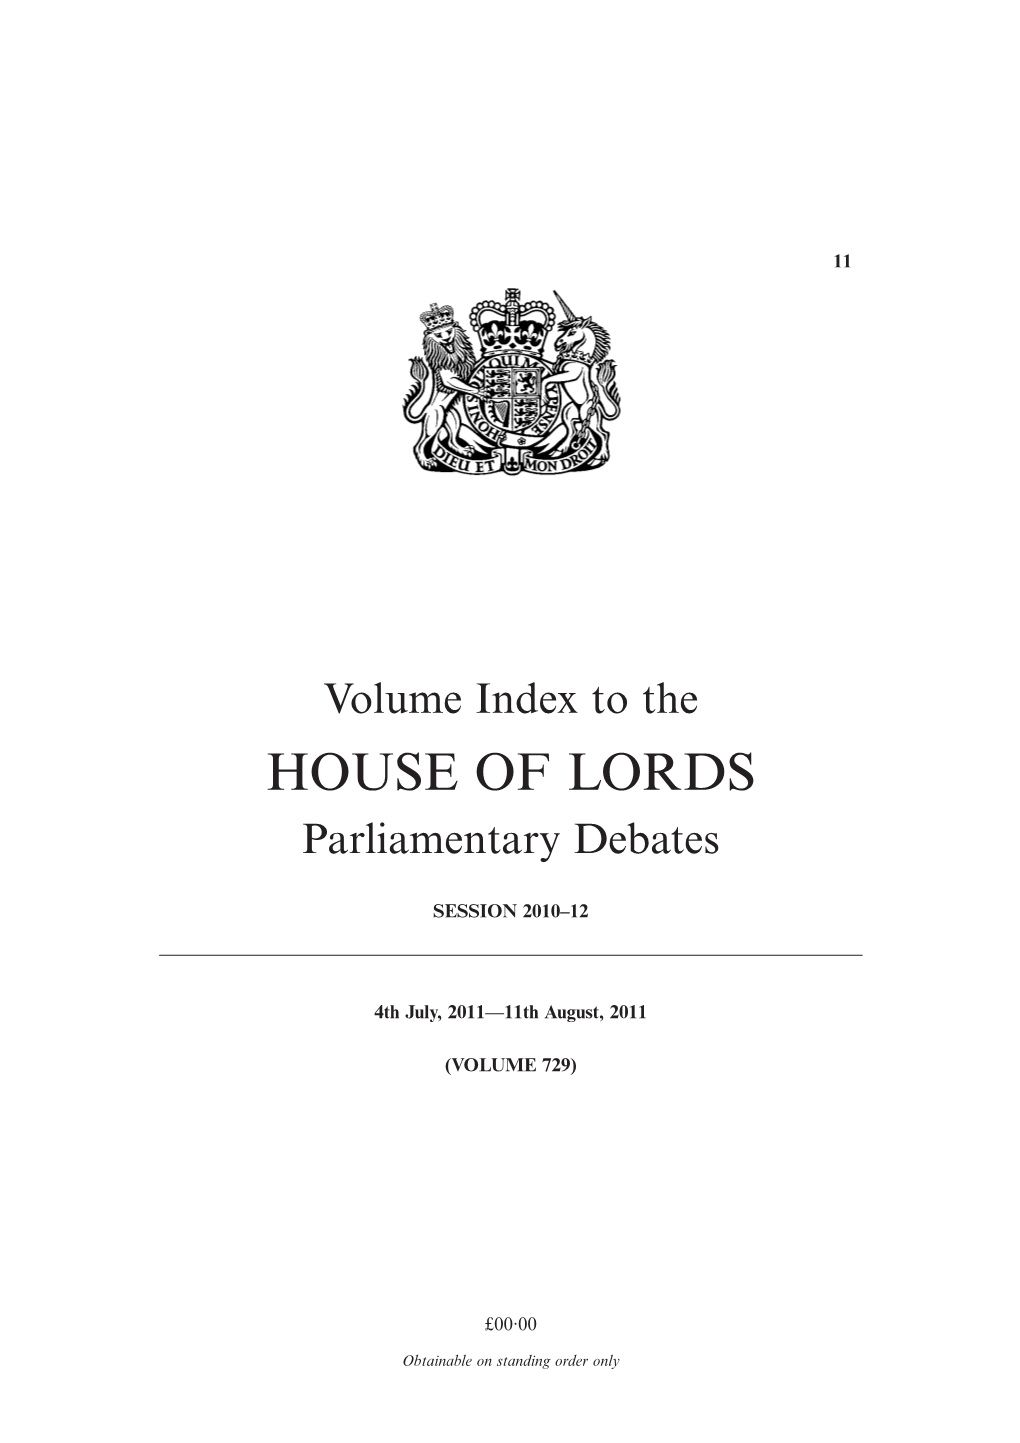 Volume Index to the HOUSE of LORDS Parliamentary Debates